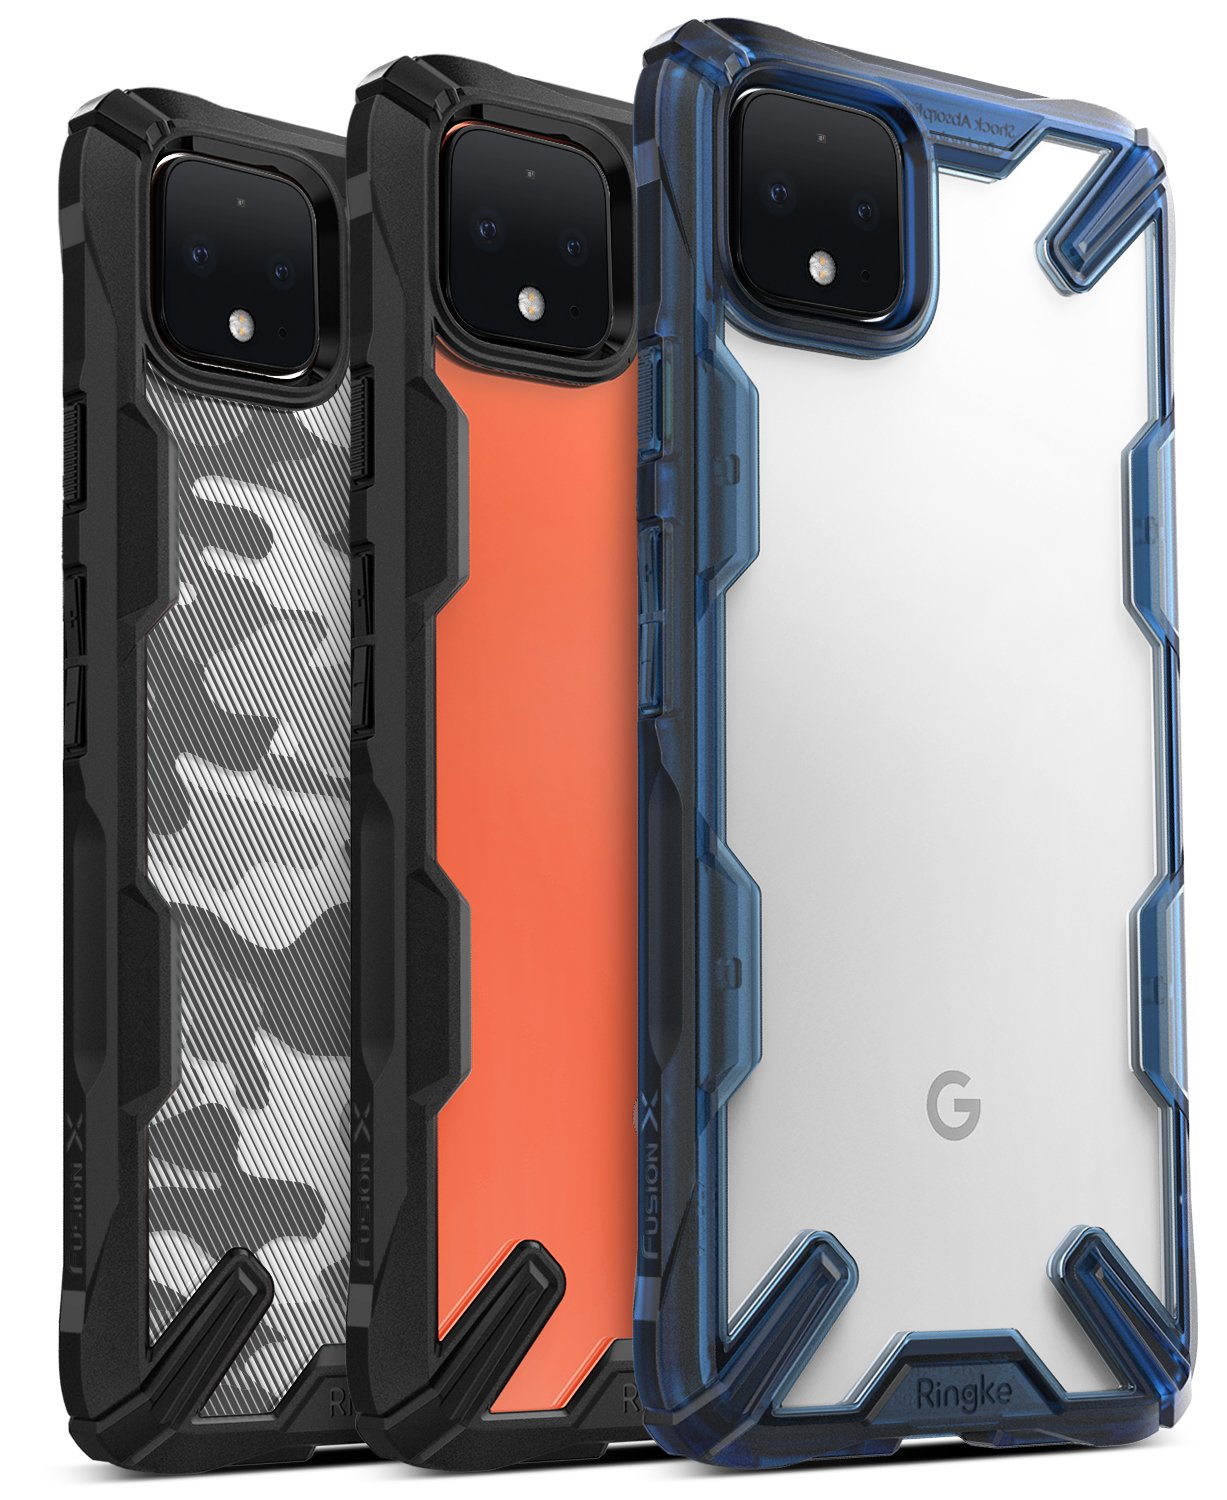 Ringke Fusion-X Case compatible with Google Pixel 4